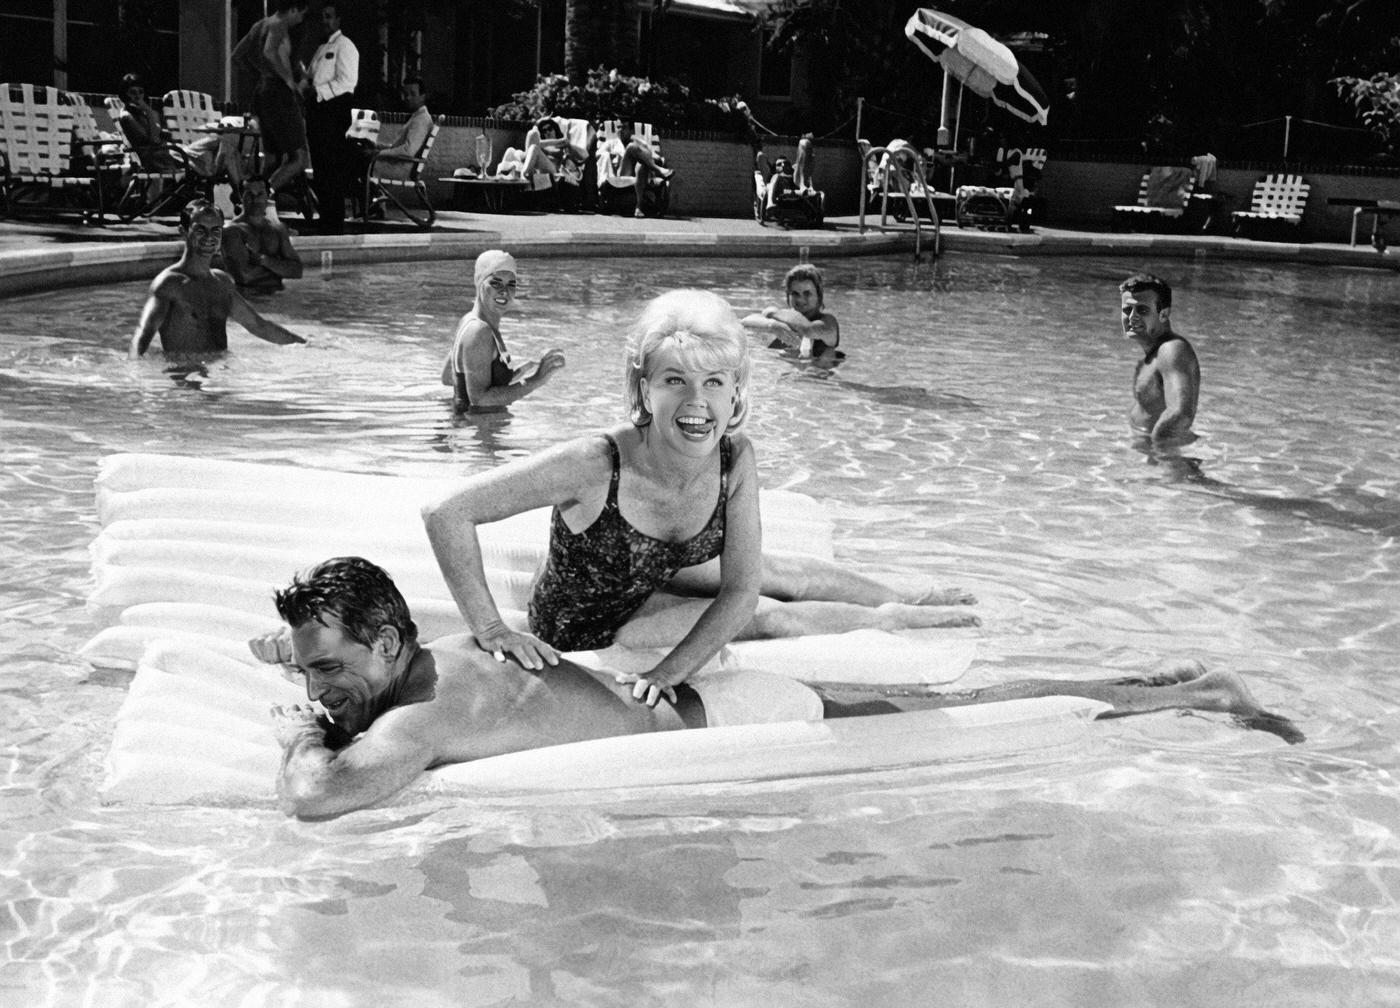 Doris Day and Cary Grant in the Pool While Filming "A Touch of Mink," Los Angeles, 1961